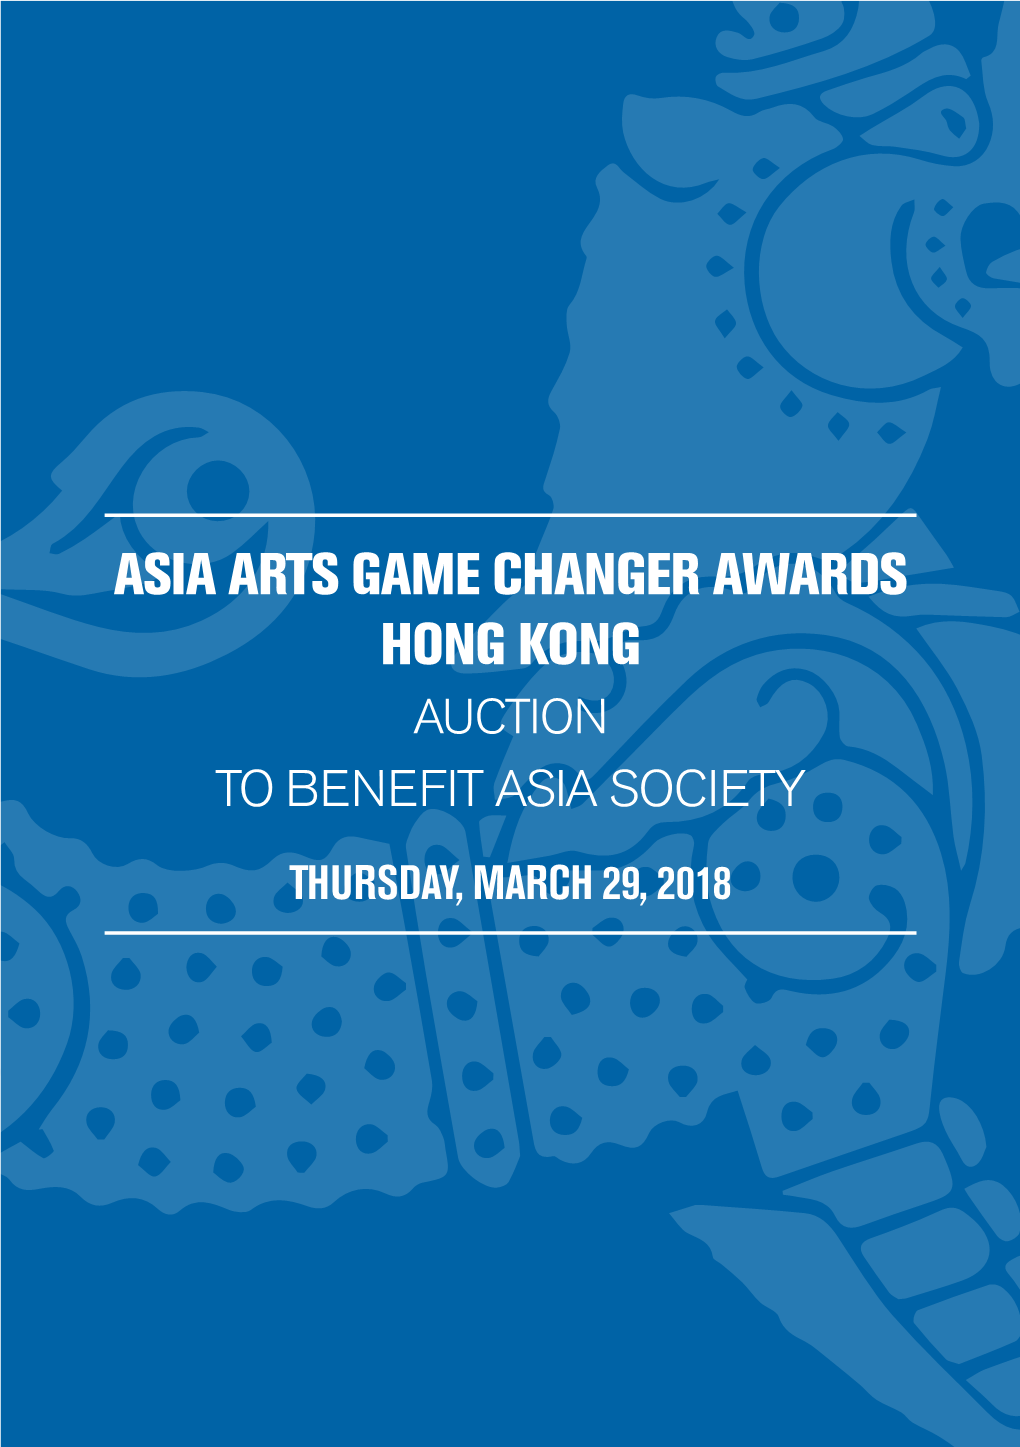 Asia Arts Game Changer Awards Hong Kong Auction to Benefit Asia Society Thursday, March 29, 2018 1